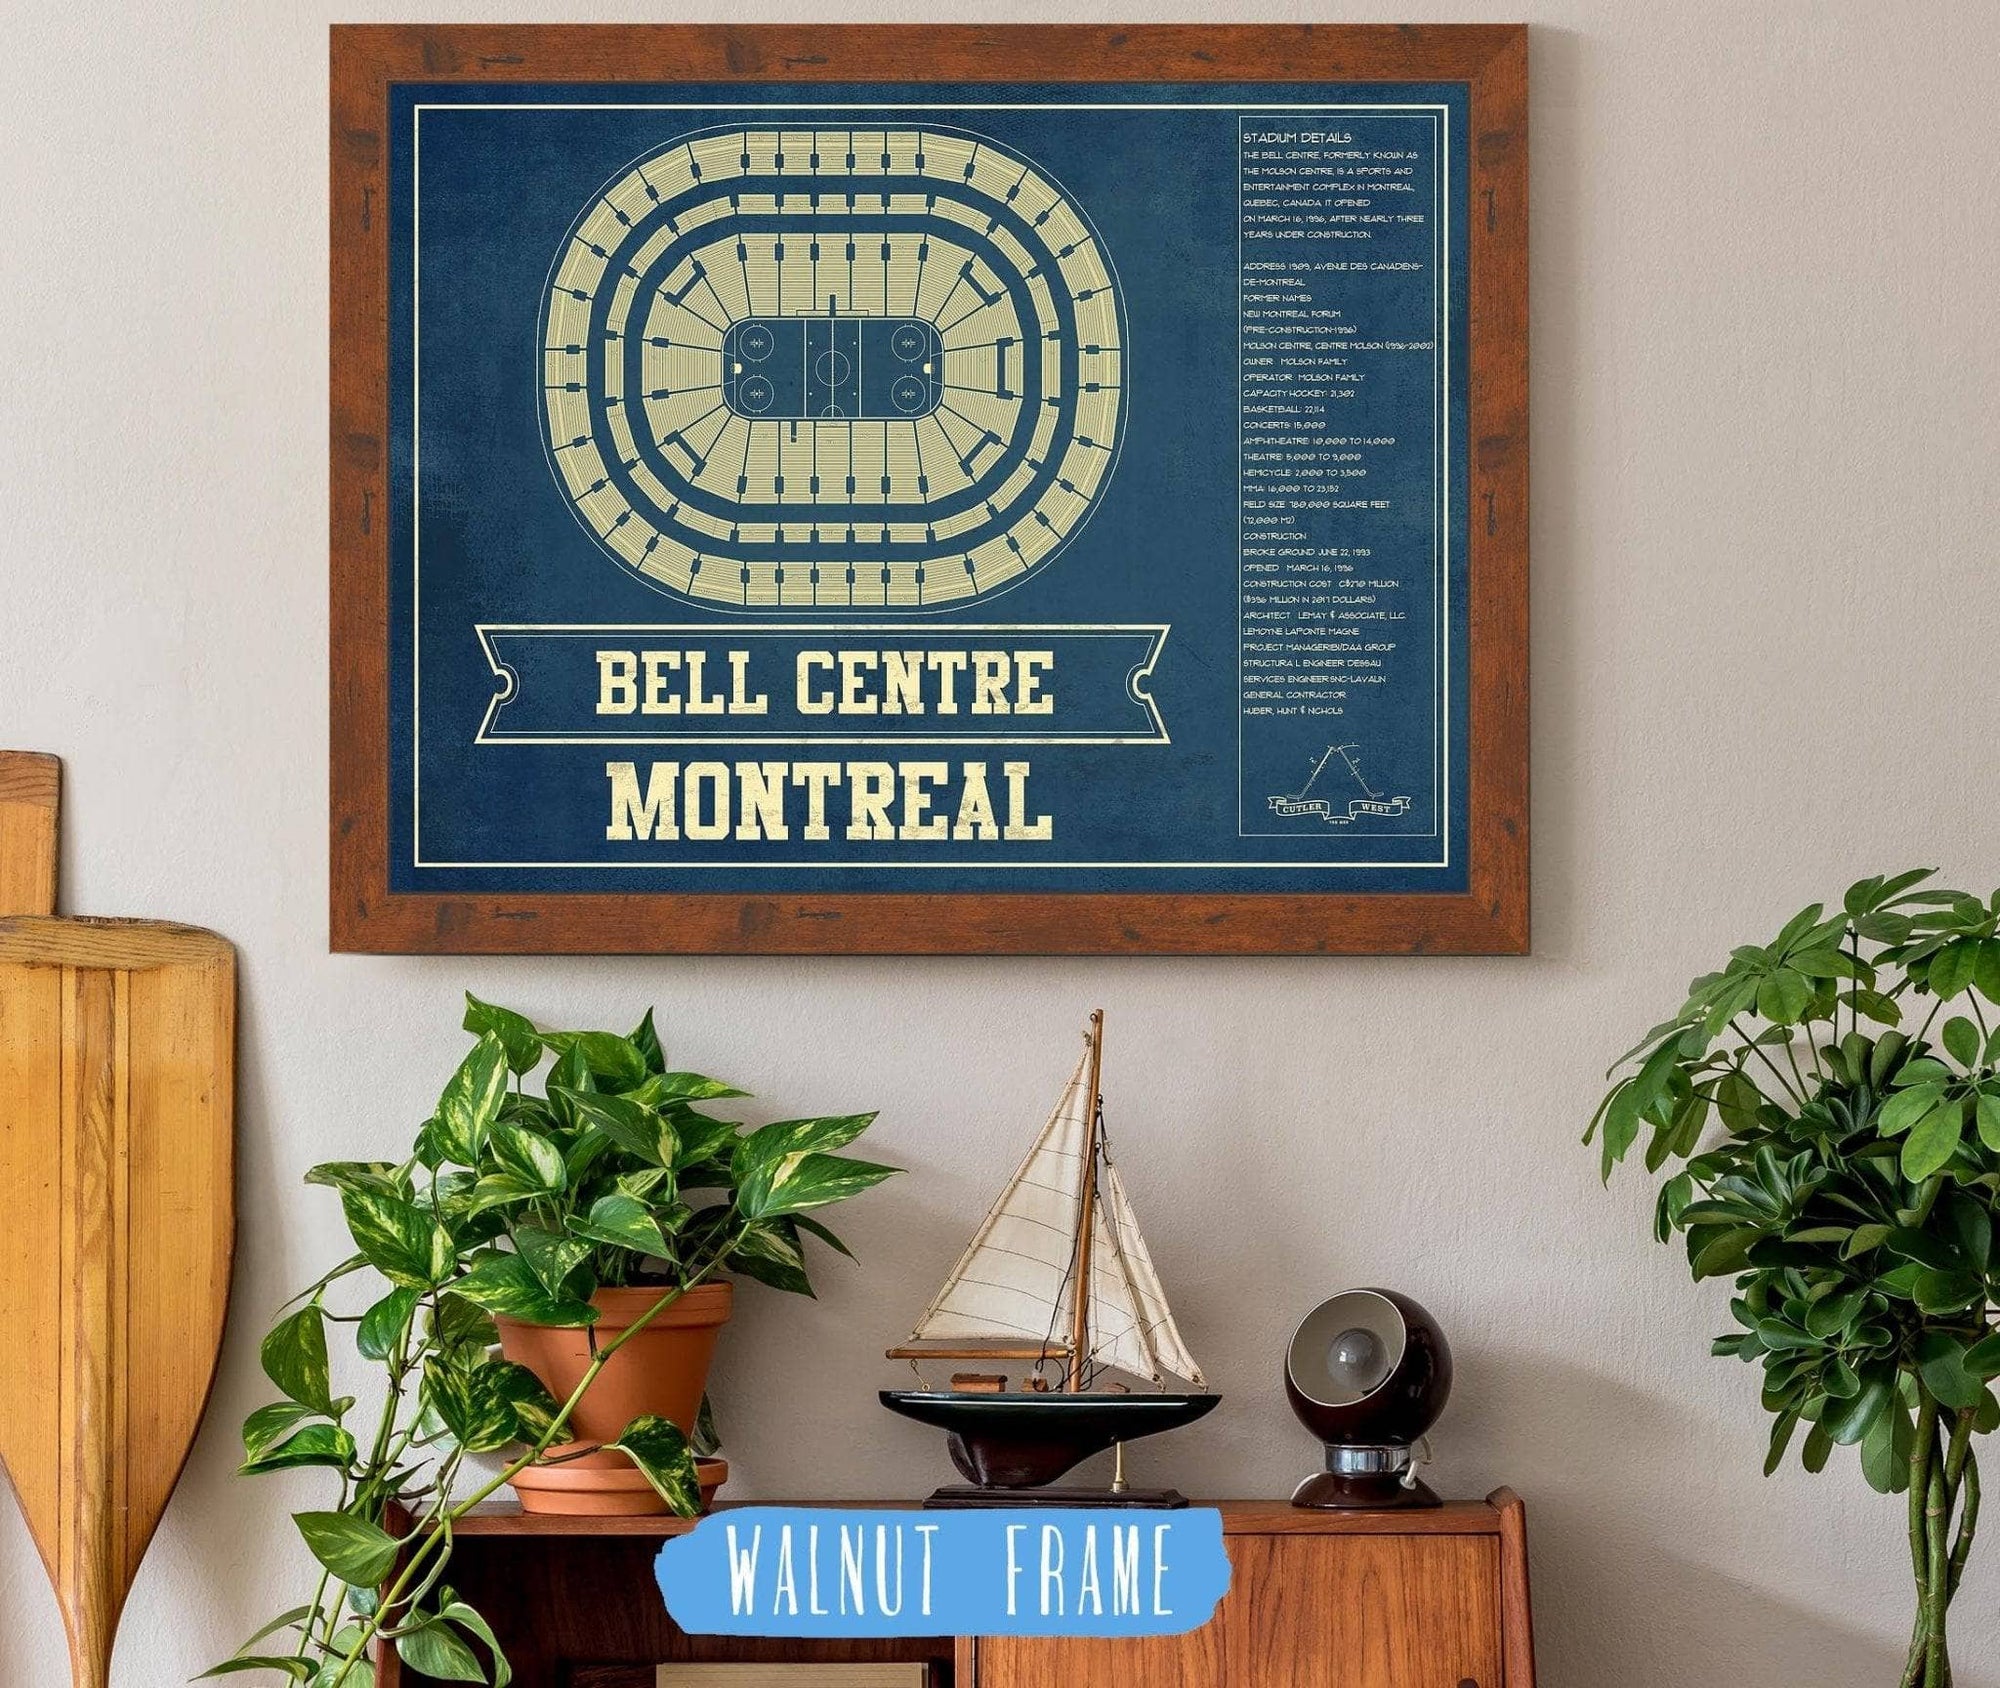 Cutler West 14" x 11" / Walnut Frame Montreal Canadiens Bell Centre Seating Chart - Vintage Hockey Print 673822723_79998